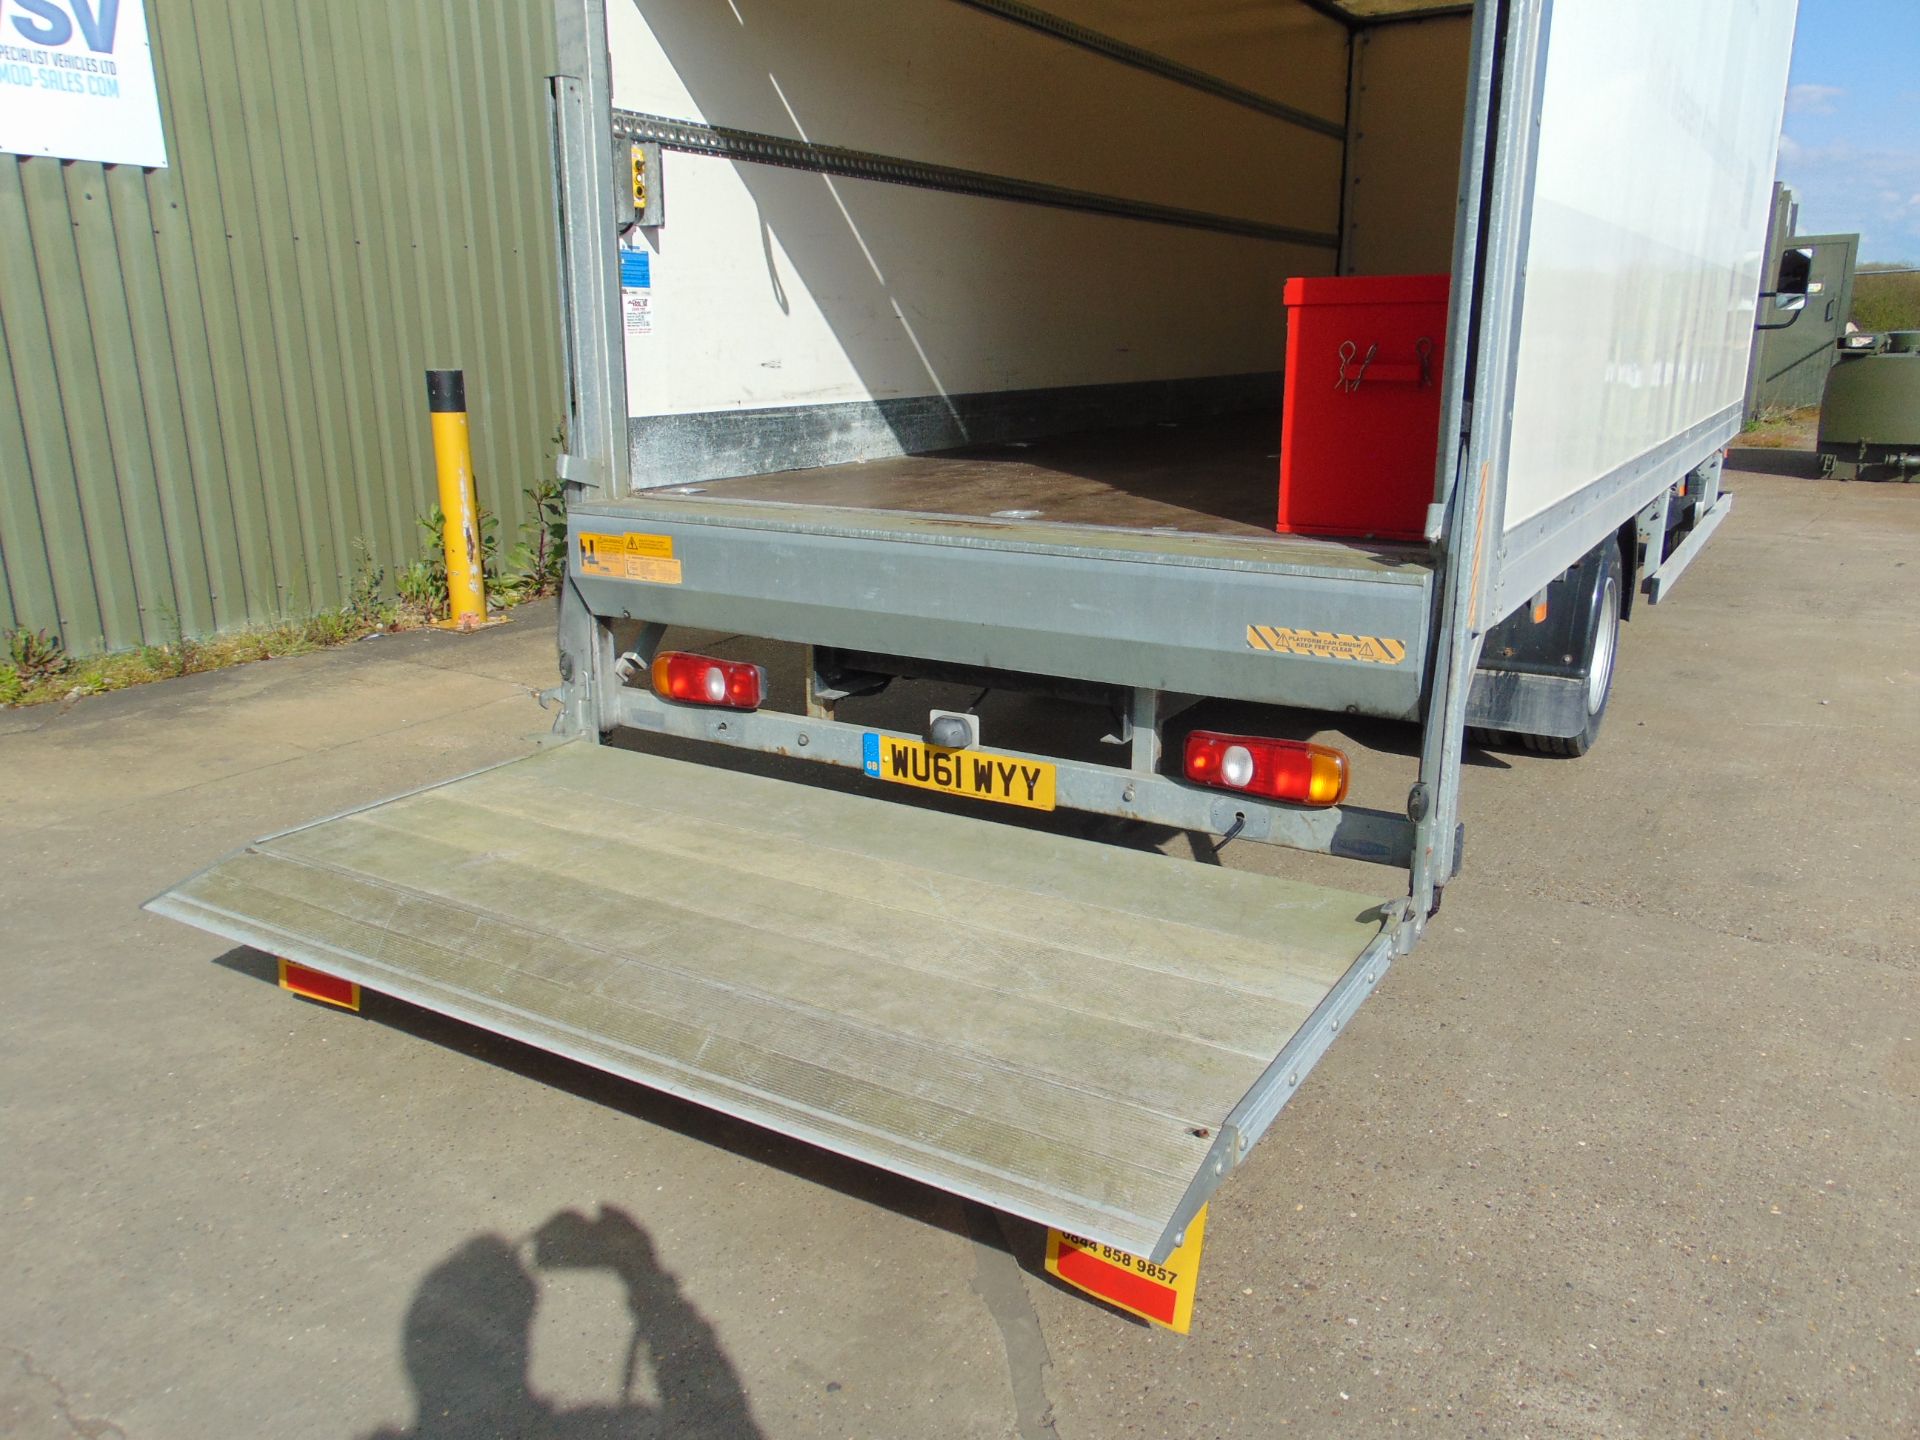 2011 Mitsubishi Fuso Canter Box lorry 7.5T - Only 5400 Miles! - Image 43 of 51